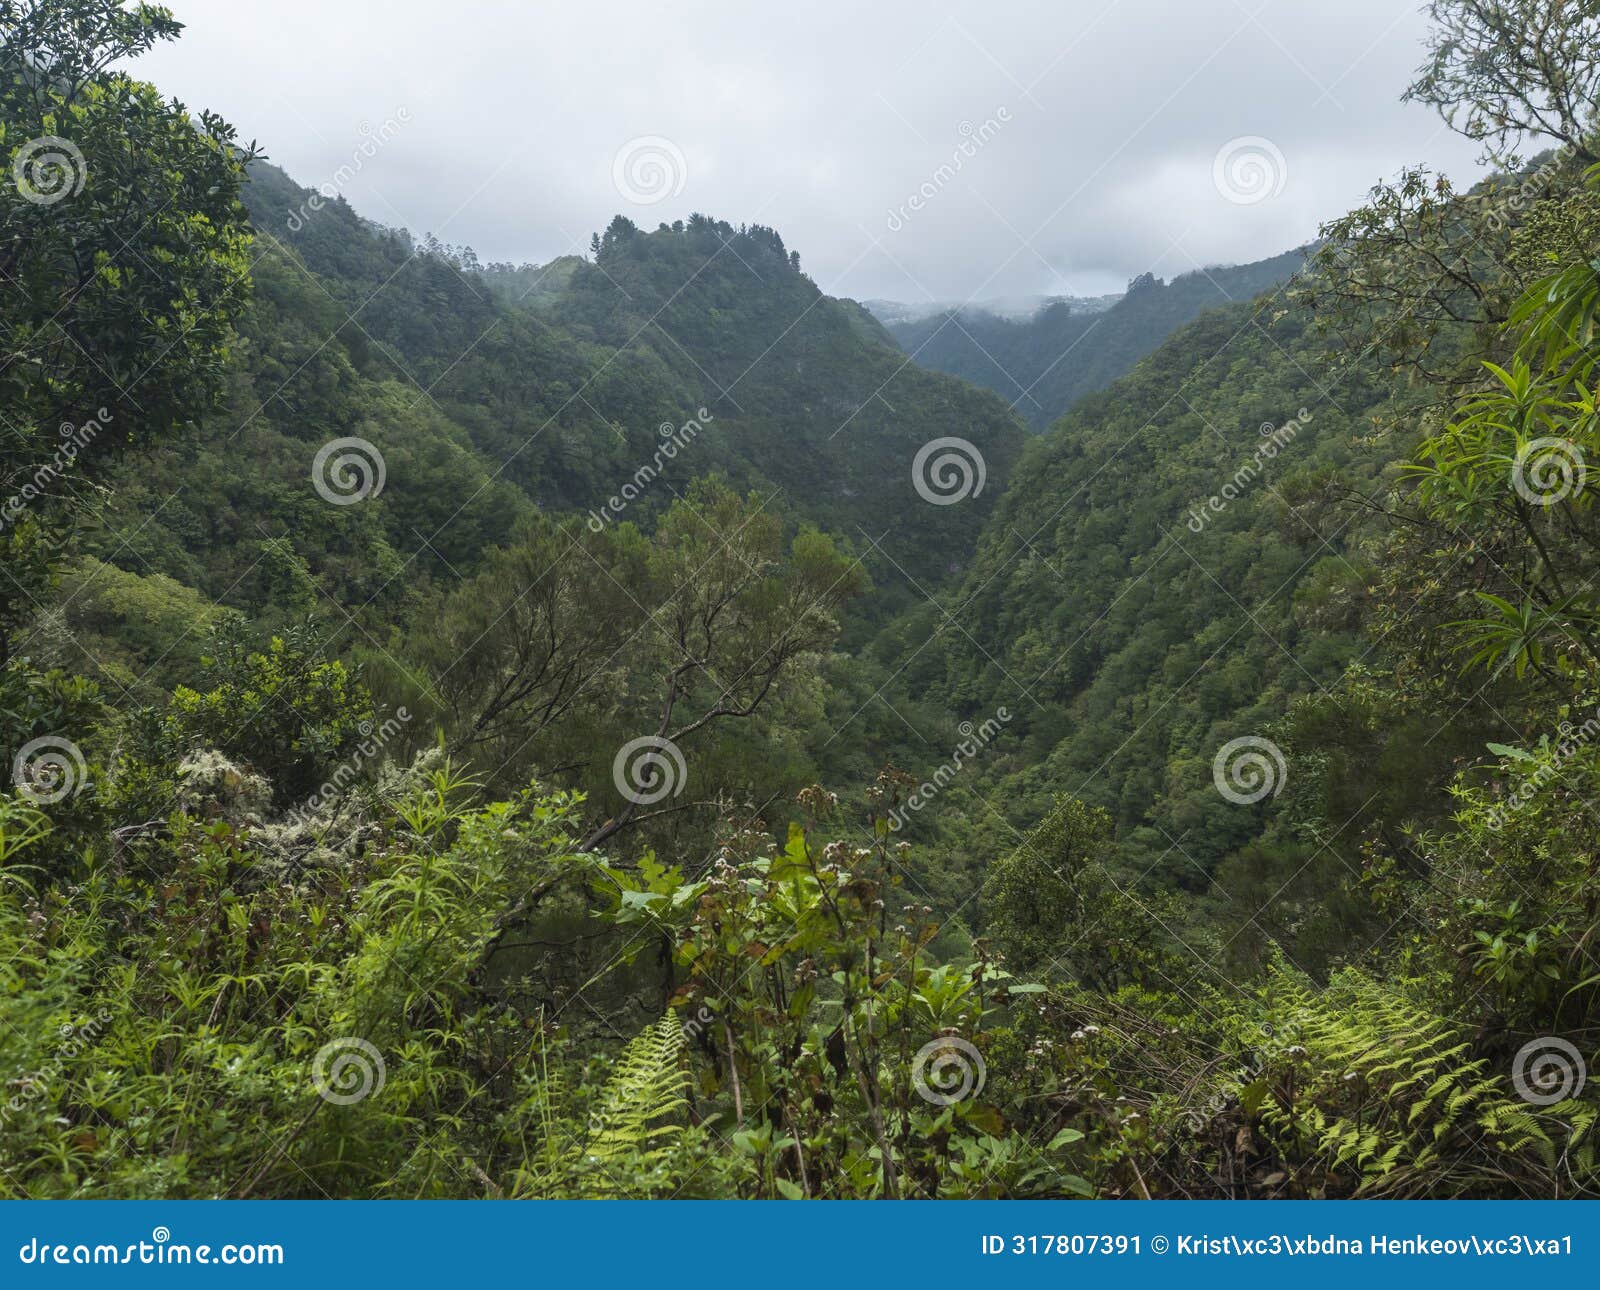 view of green hills, mountain landscape with dense tropical forest plants and vegetation at levada caldeirao verde and